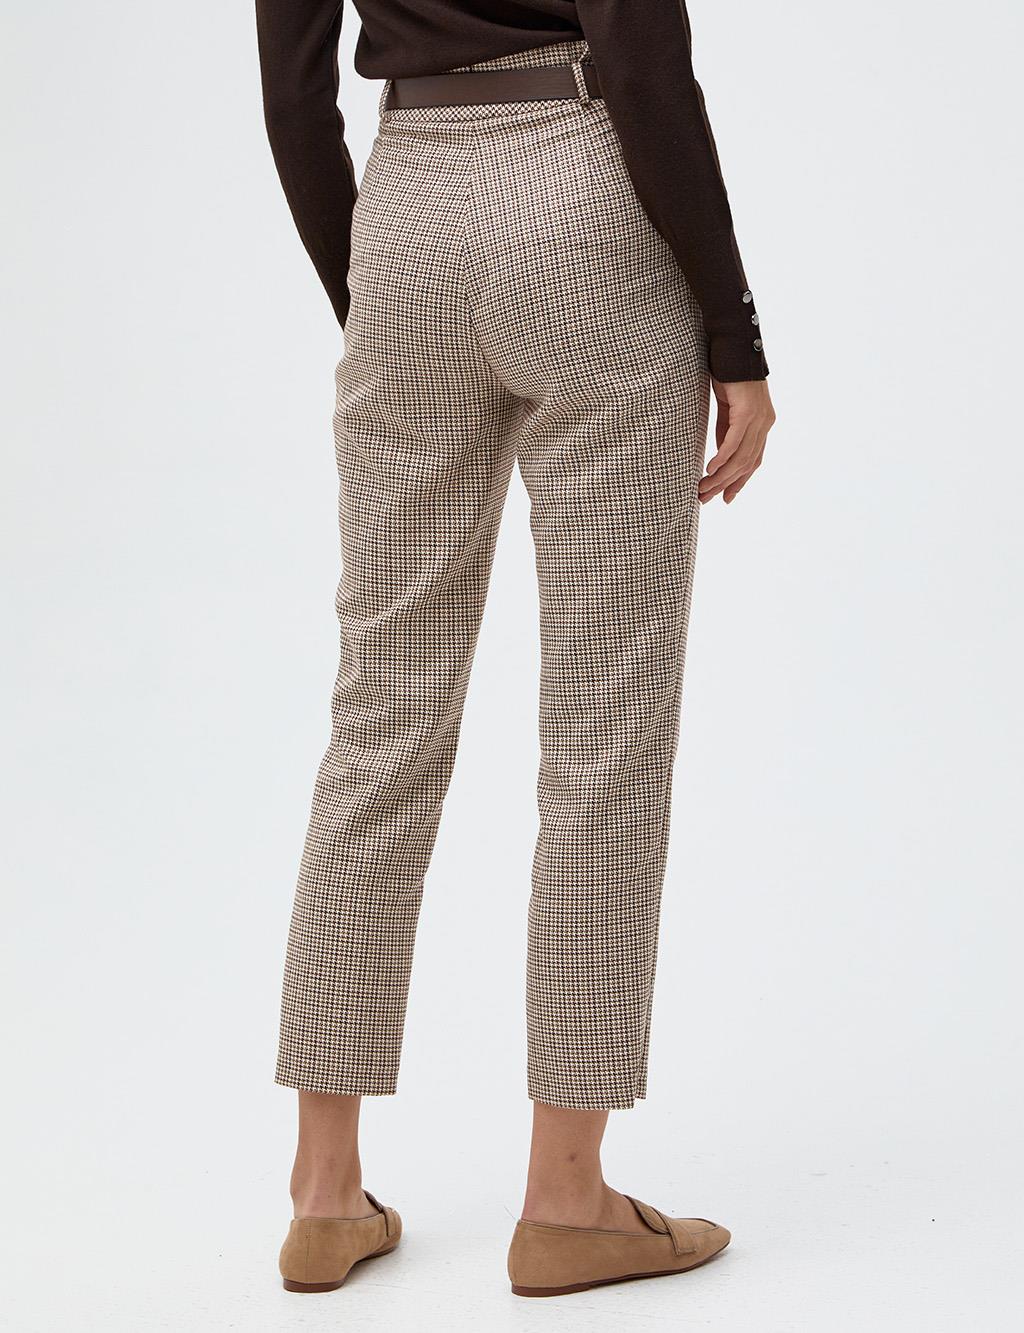 Houndstooth Patterned Pleated Pants Brown-Cream